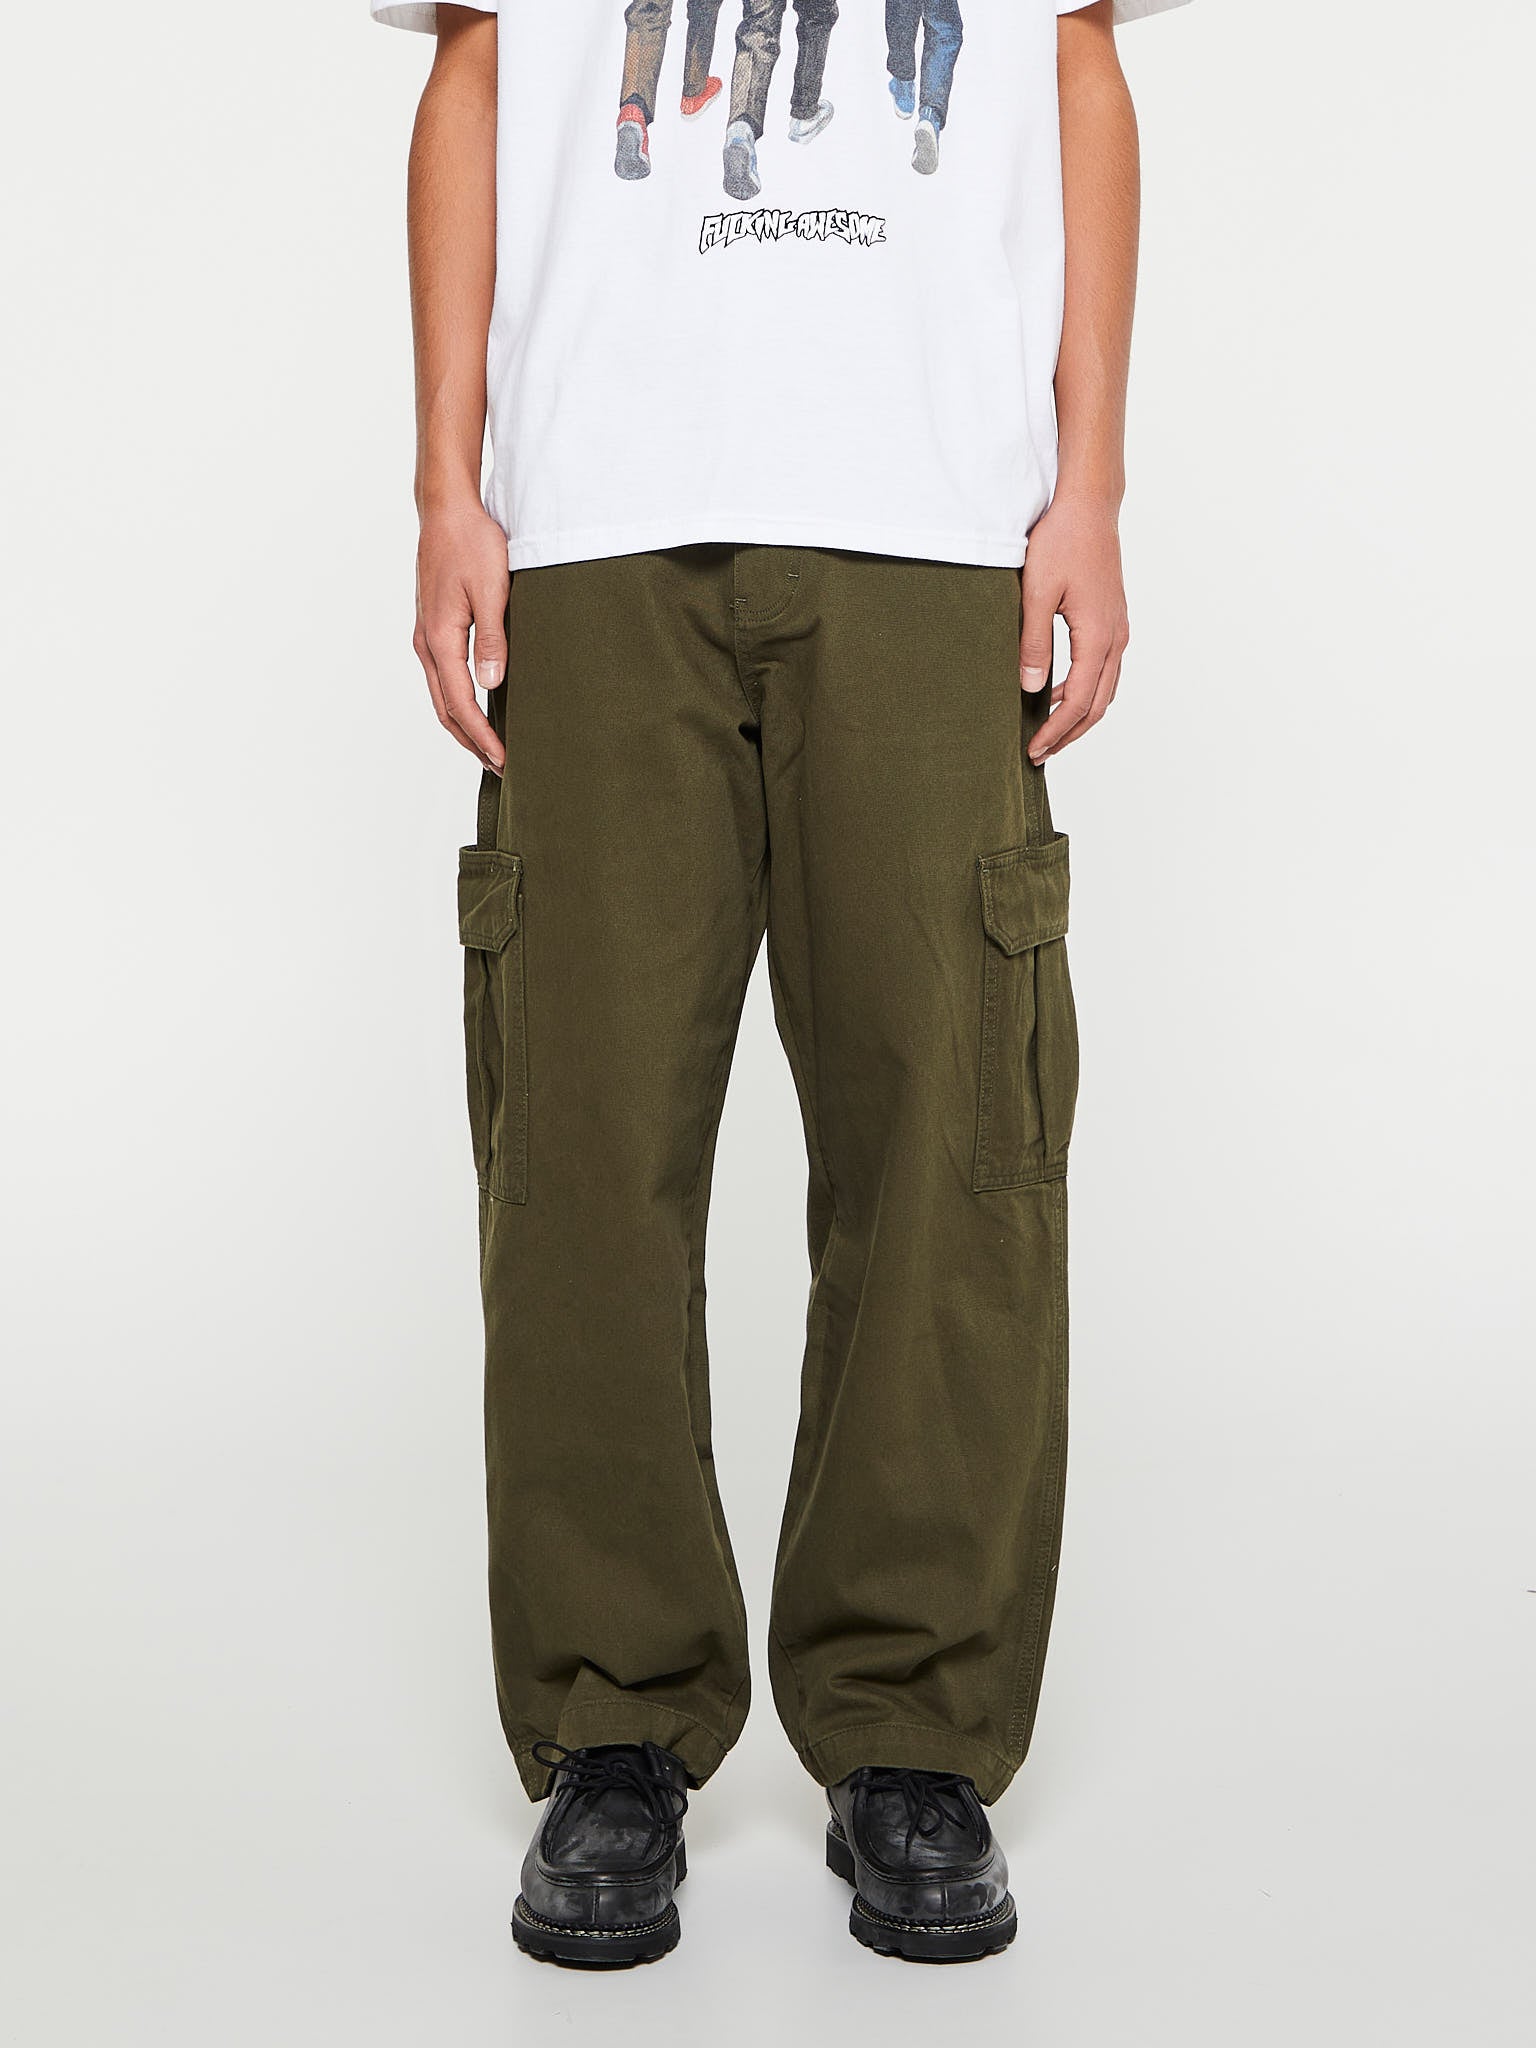 Fucking Awesome - PBS Cargo Pants in Olive